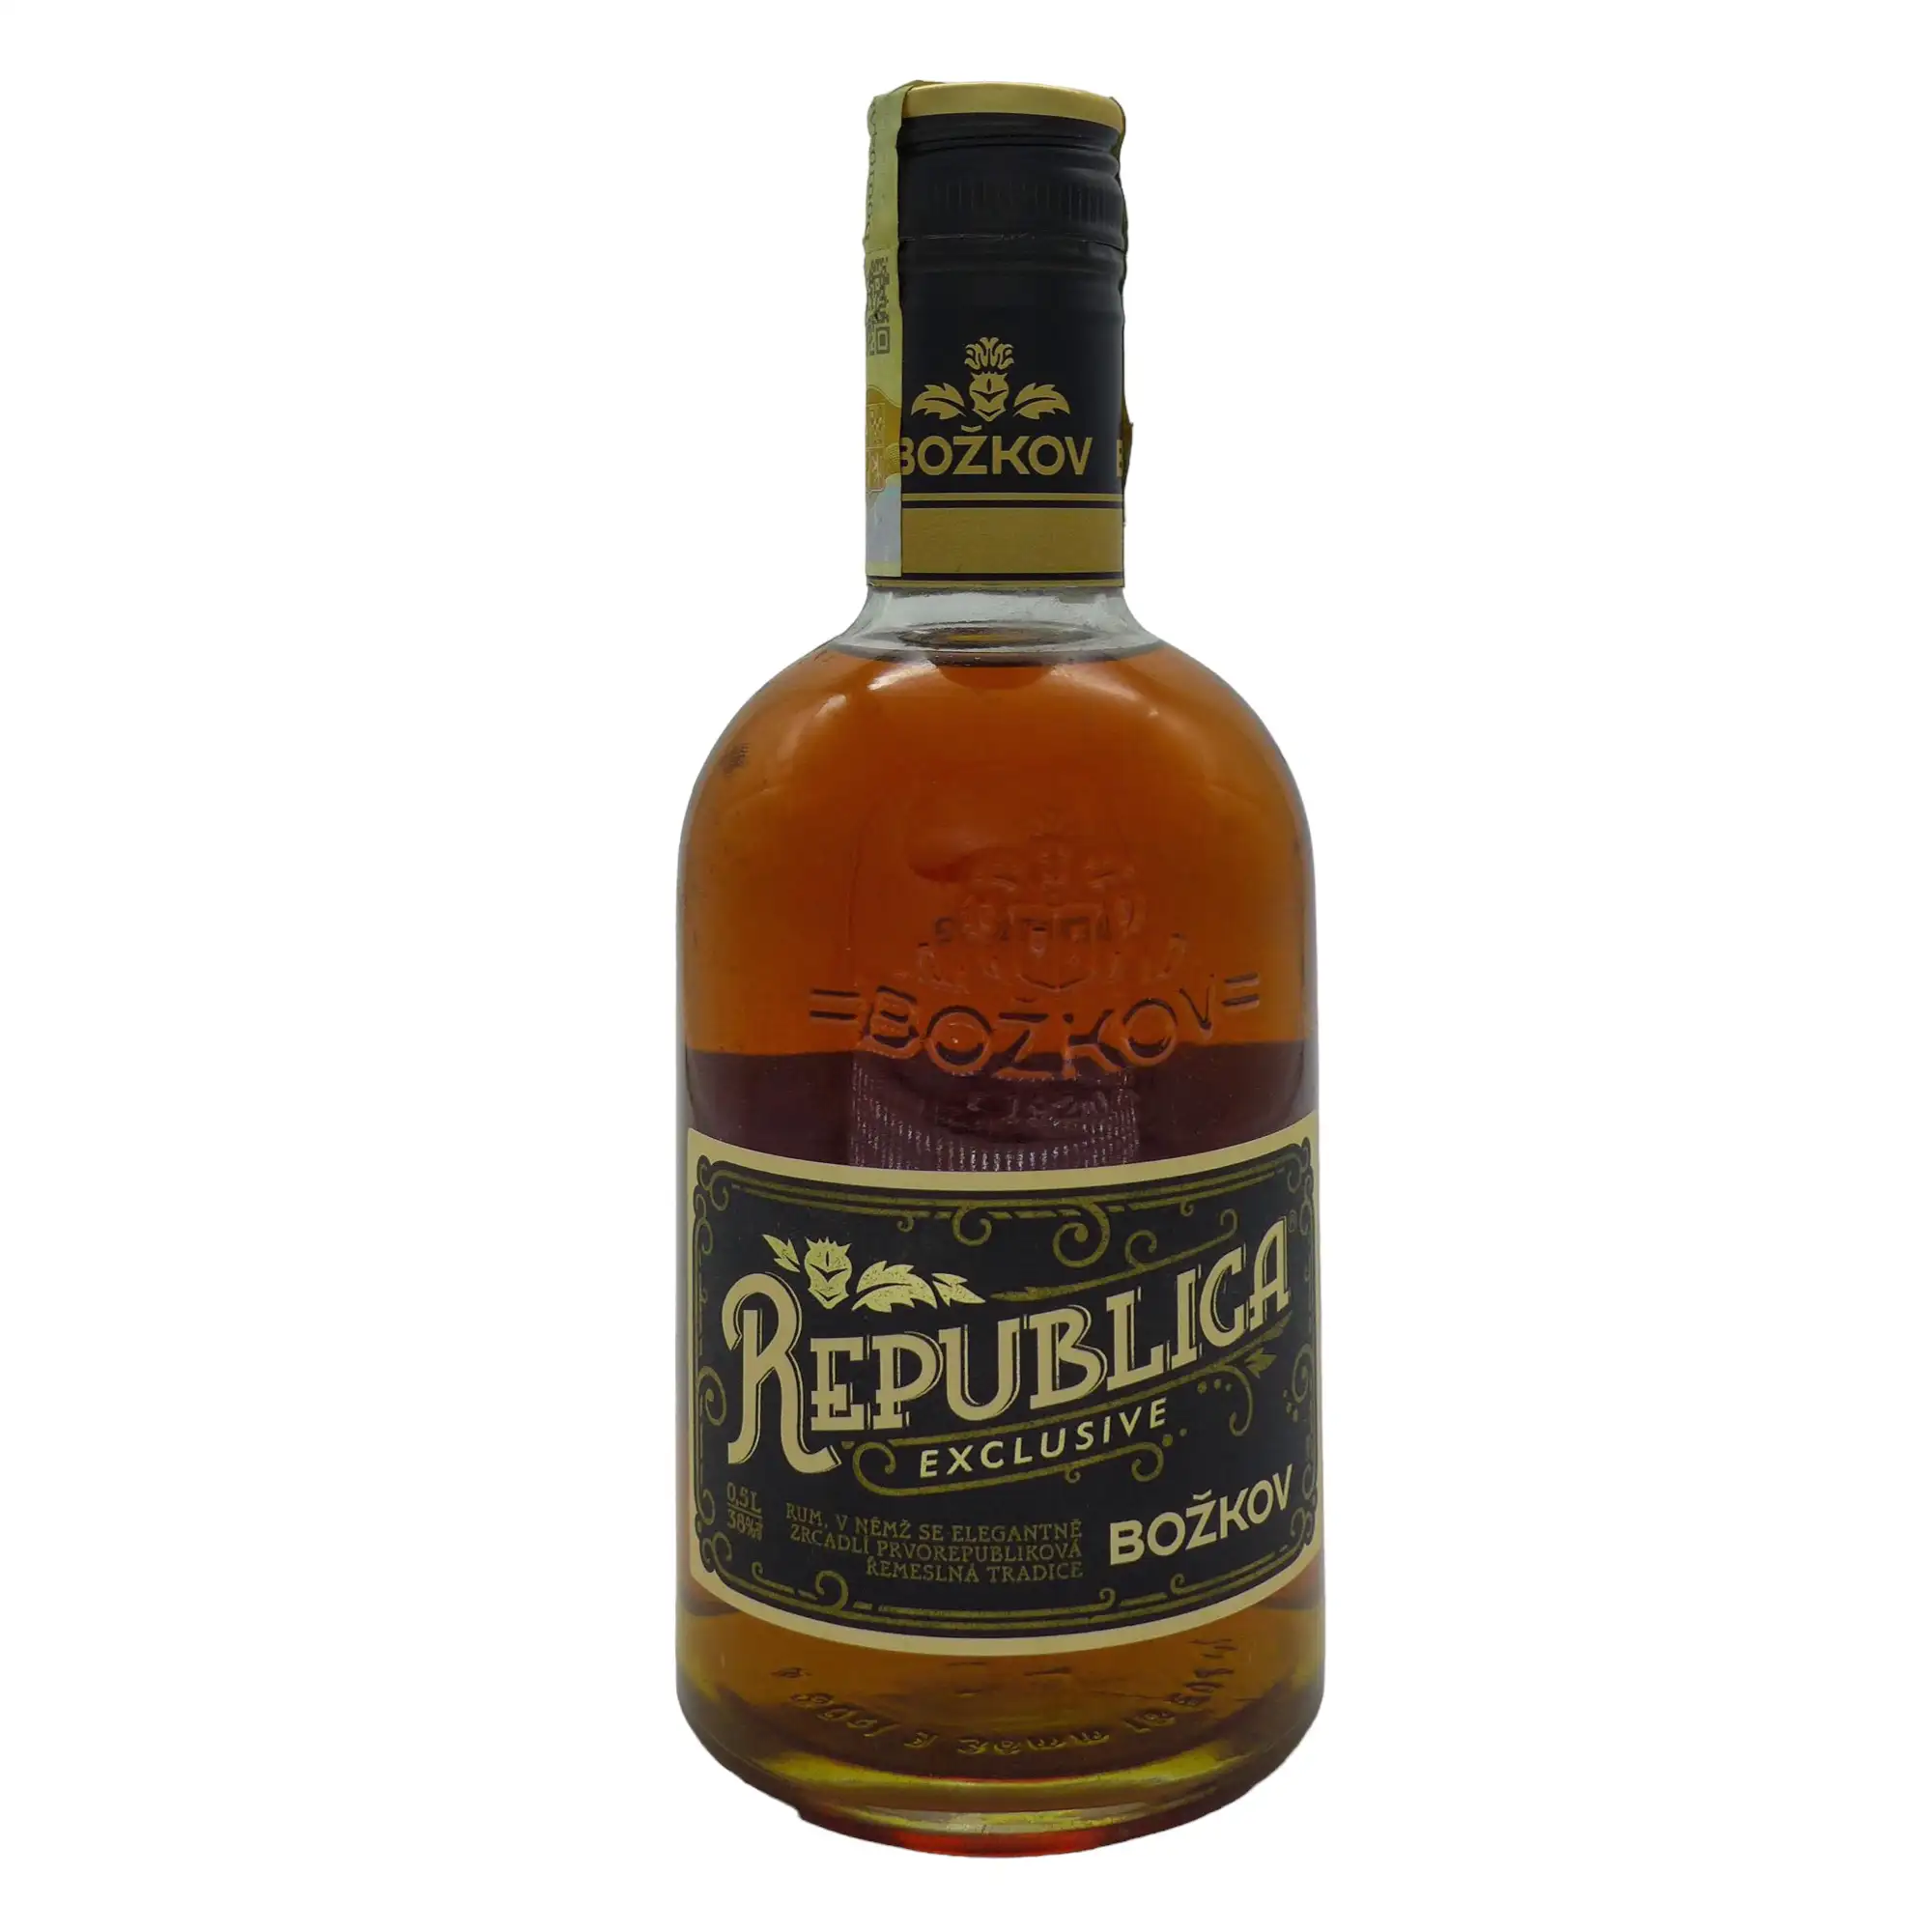 Image of the front of the bottle of the rum Božkov Republica Exclusive